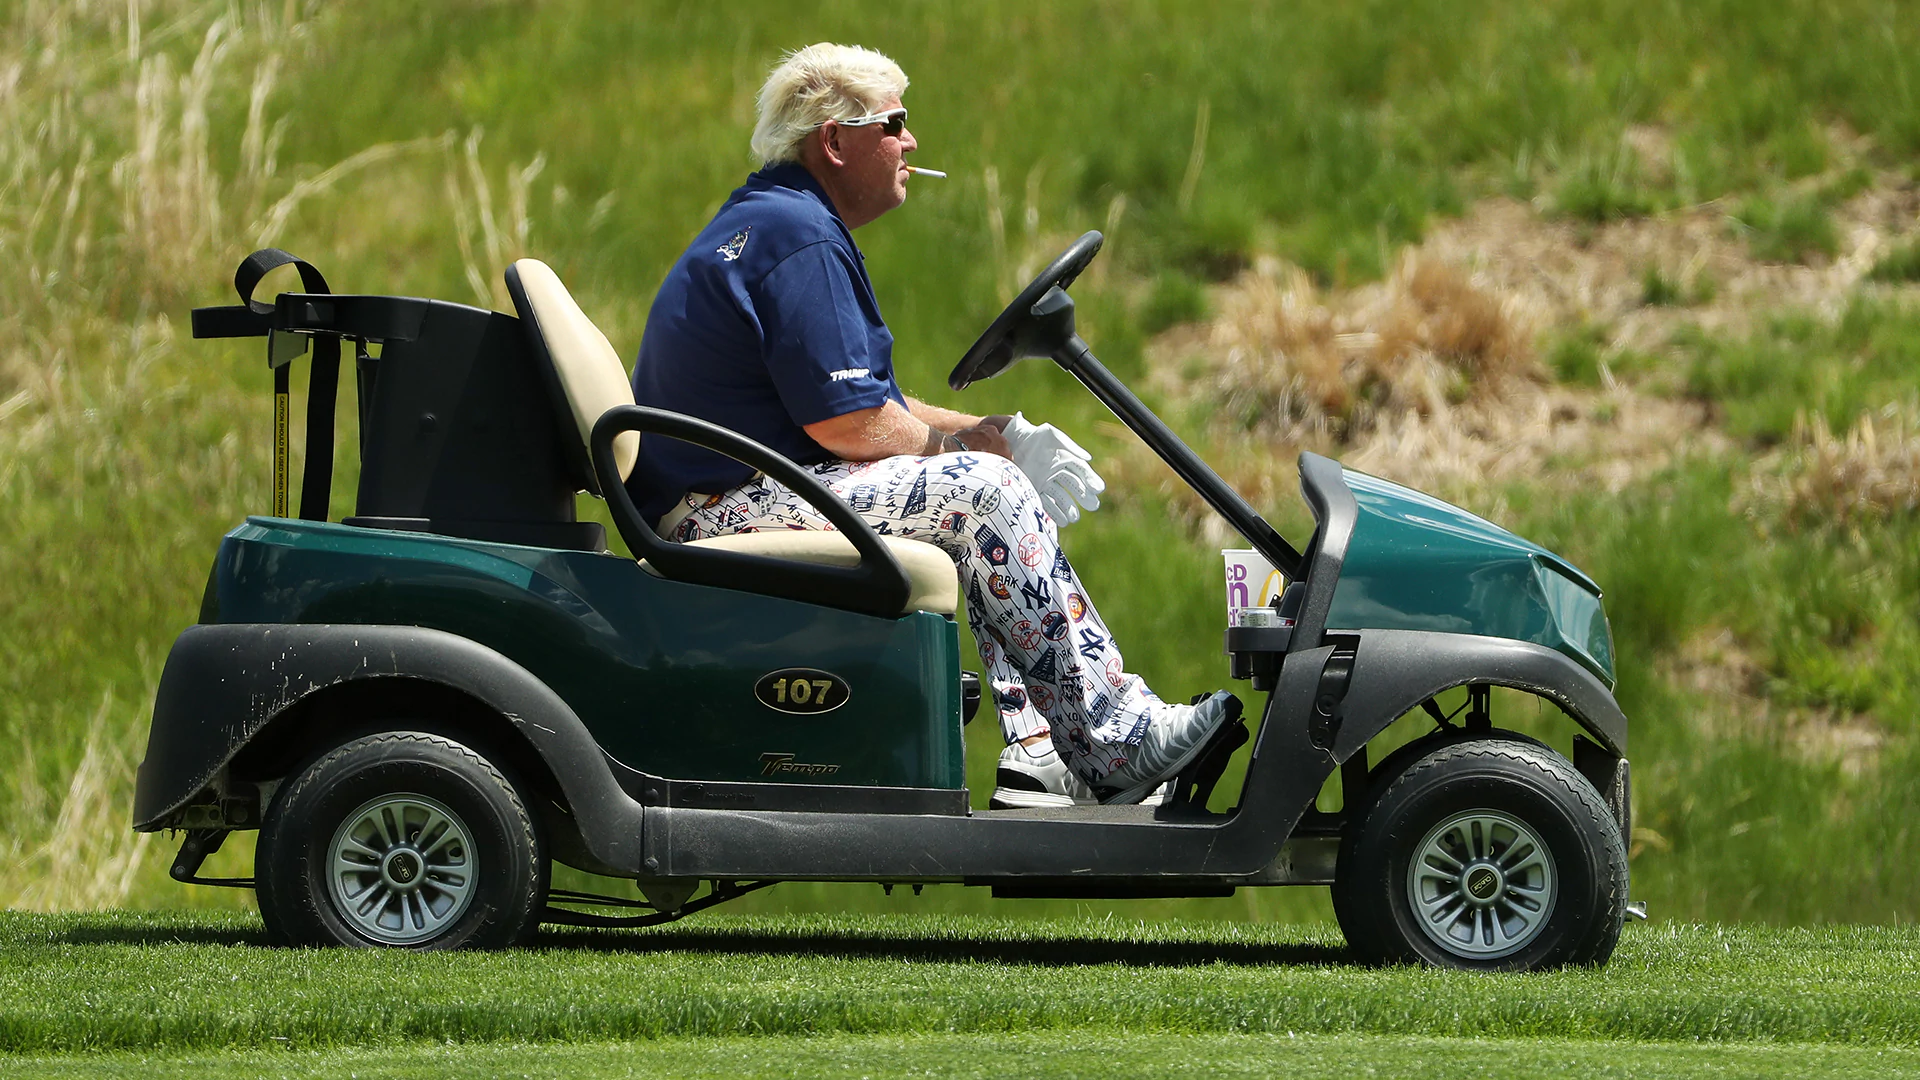 Major mobility: Inside Daly's 'awkward' ride around Bethpage